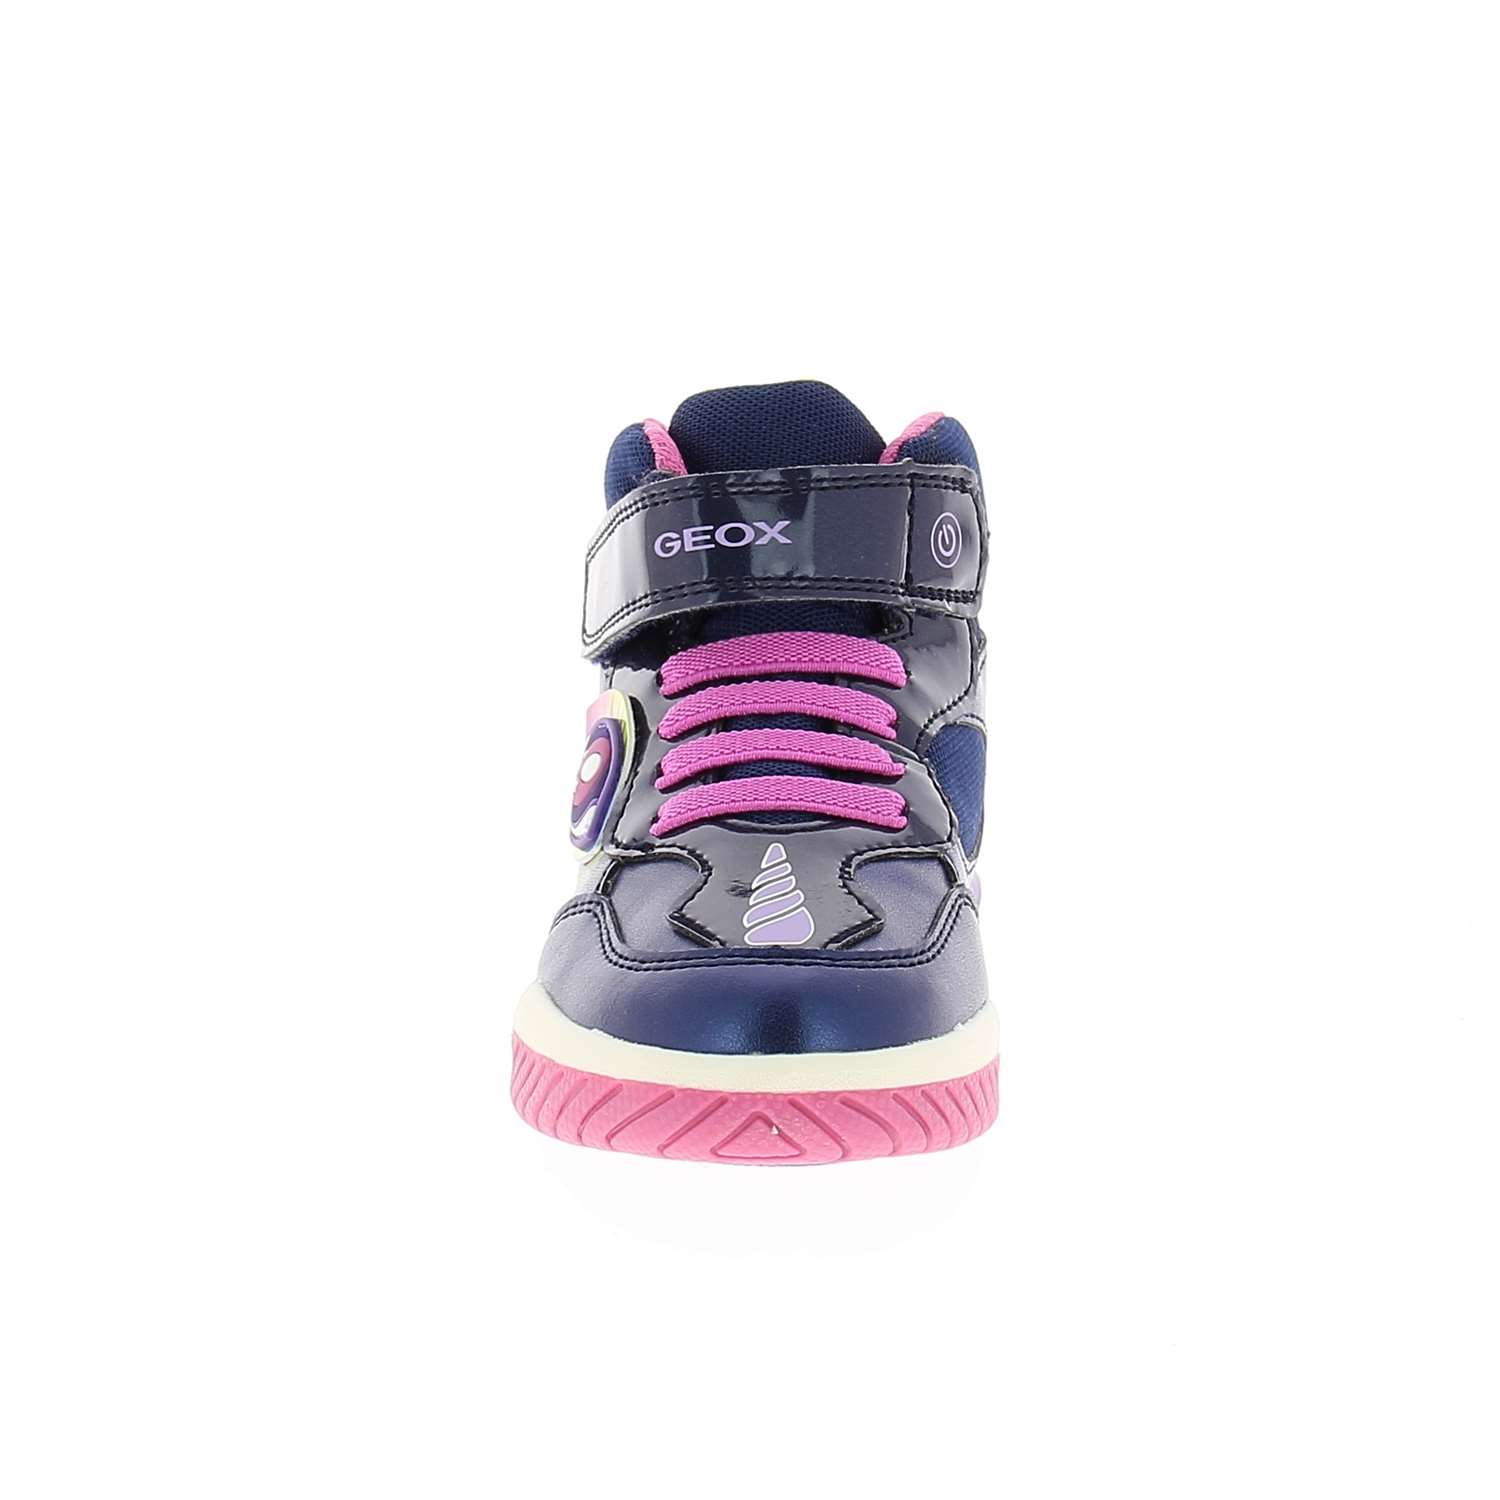 03 - INEK GIRL - GEOX - Chaussures montantes - Synthétique